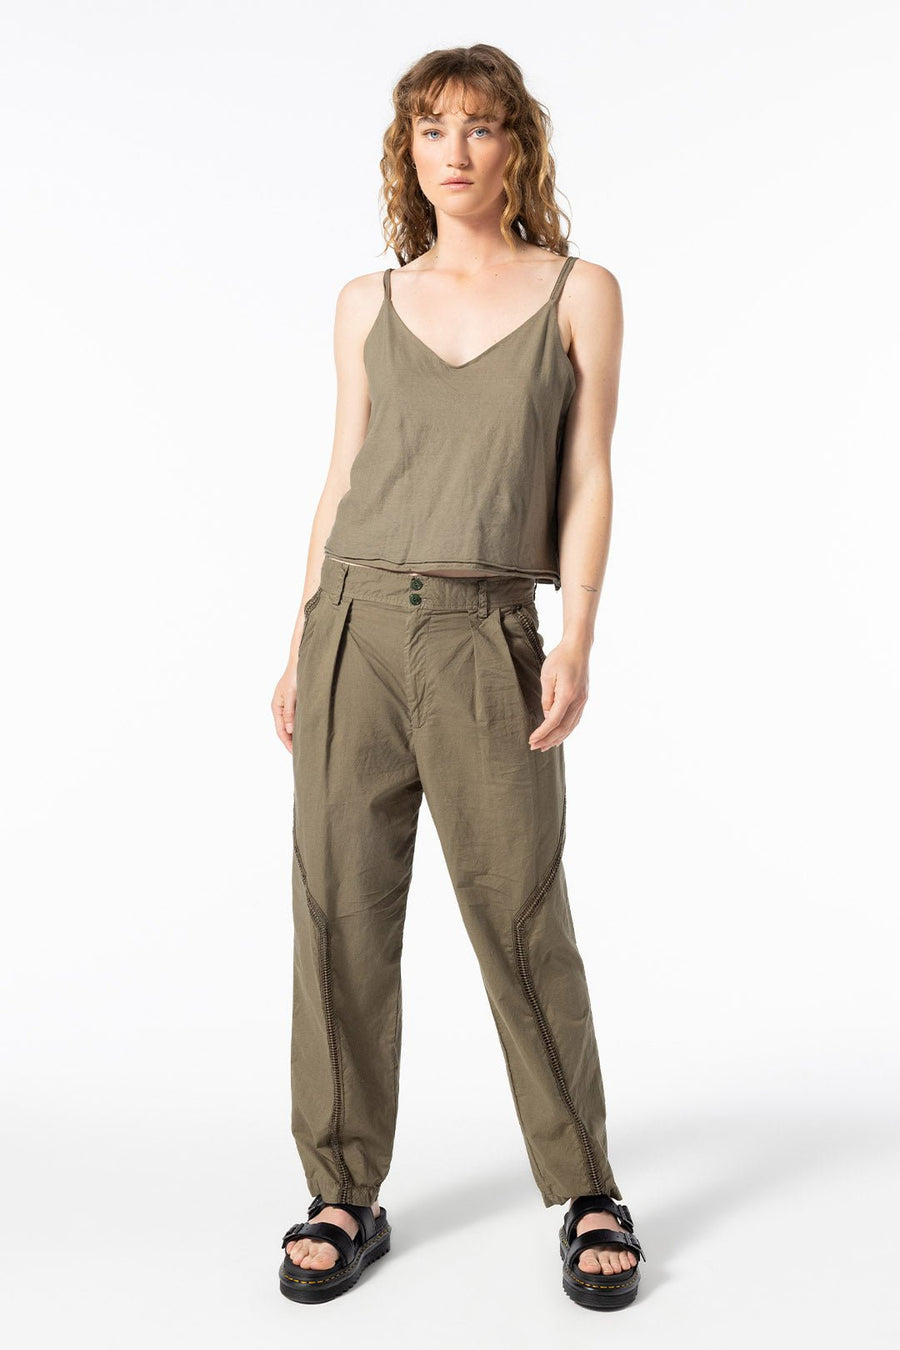 ALEXANDRIA TROUSERS, FATIGUE - Burning Torch Online Boutique